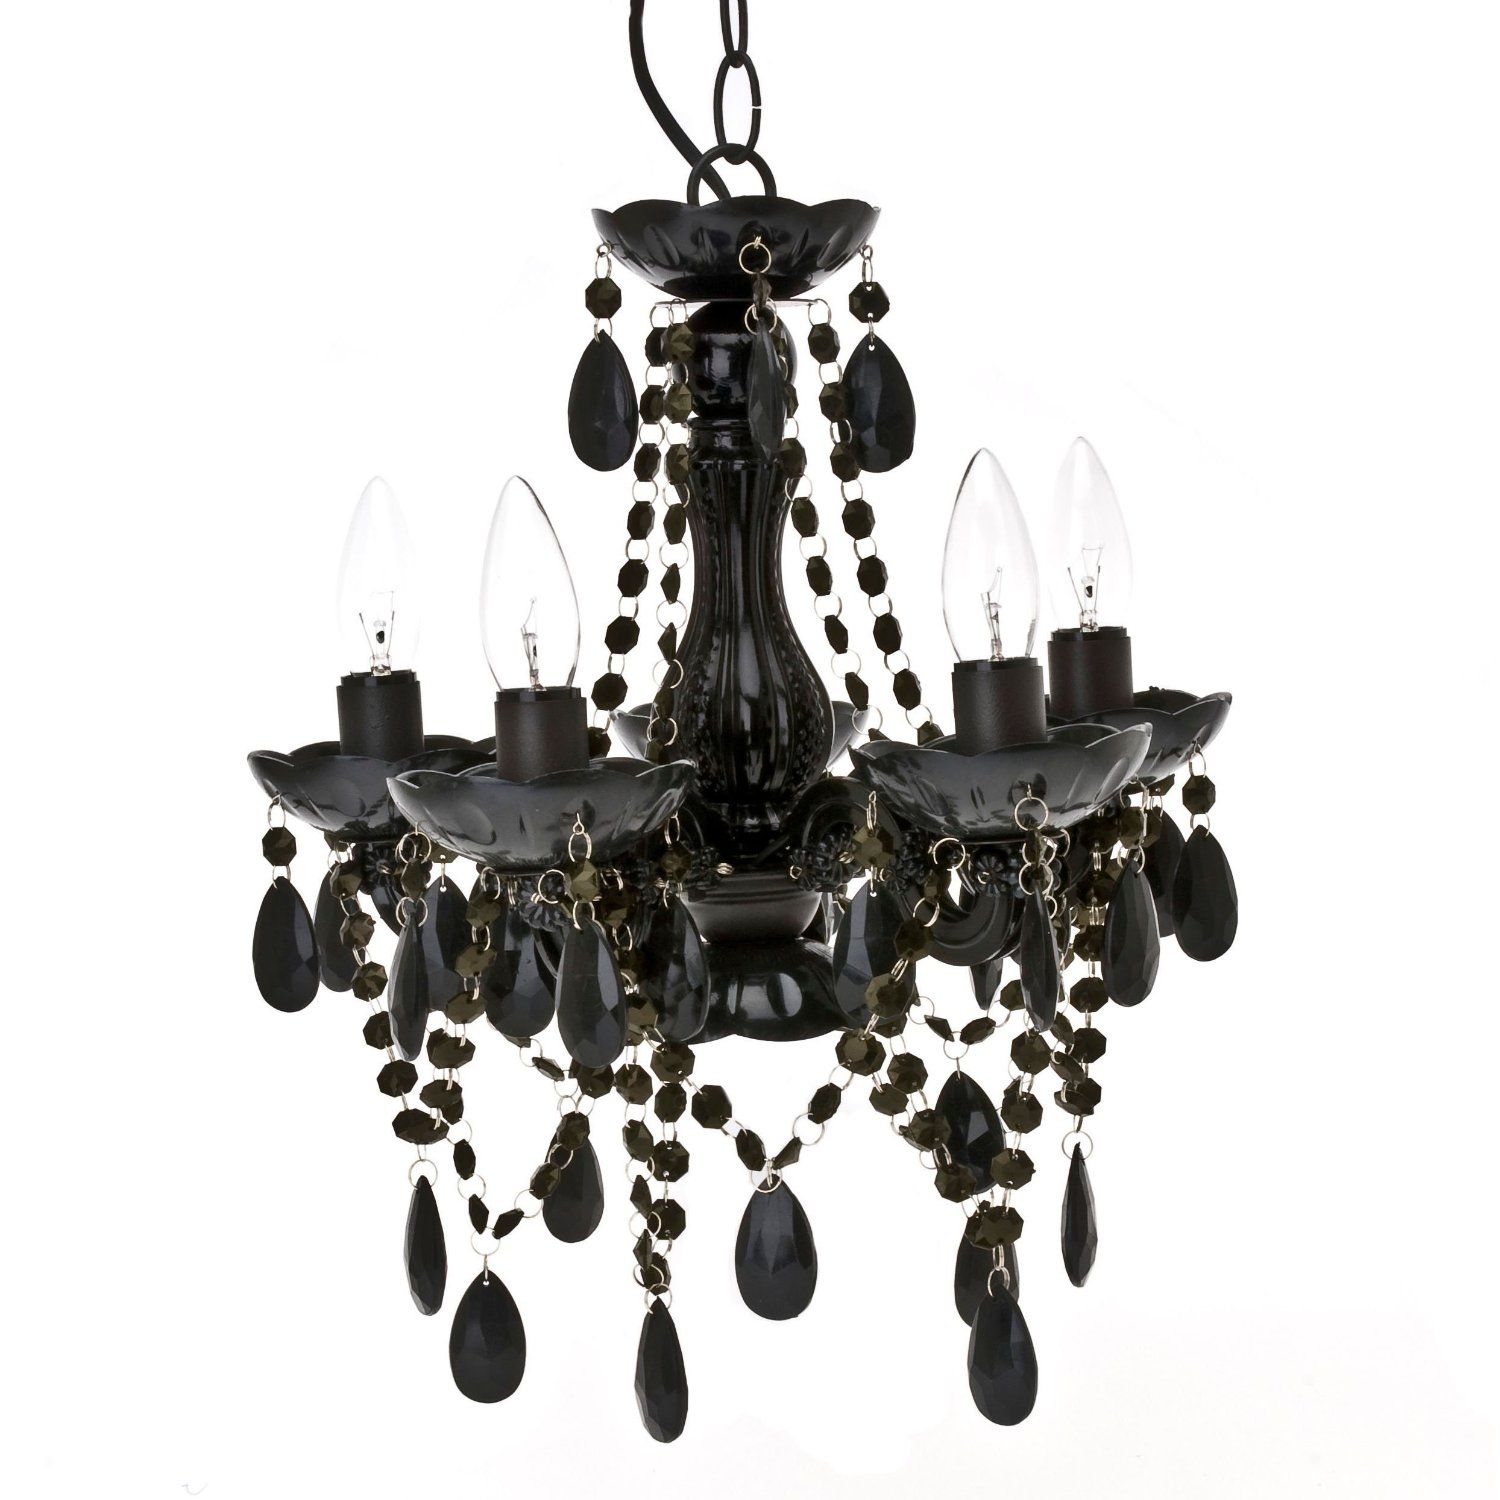 Modern Black Chandelier The Unique Looks Of Black Chandelier Inside Modern Black Chandelier (View 4 of 12)